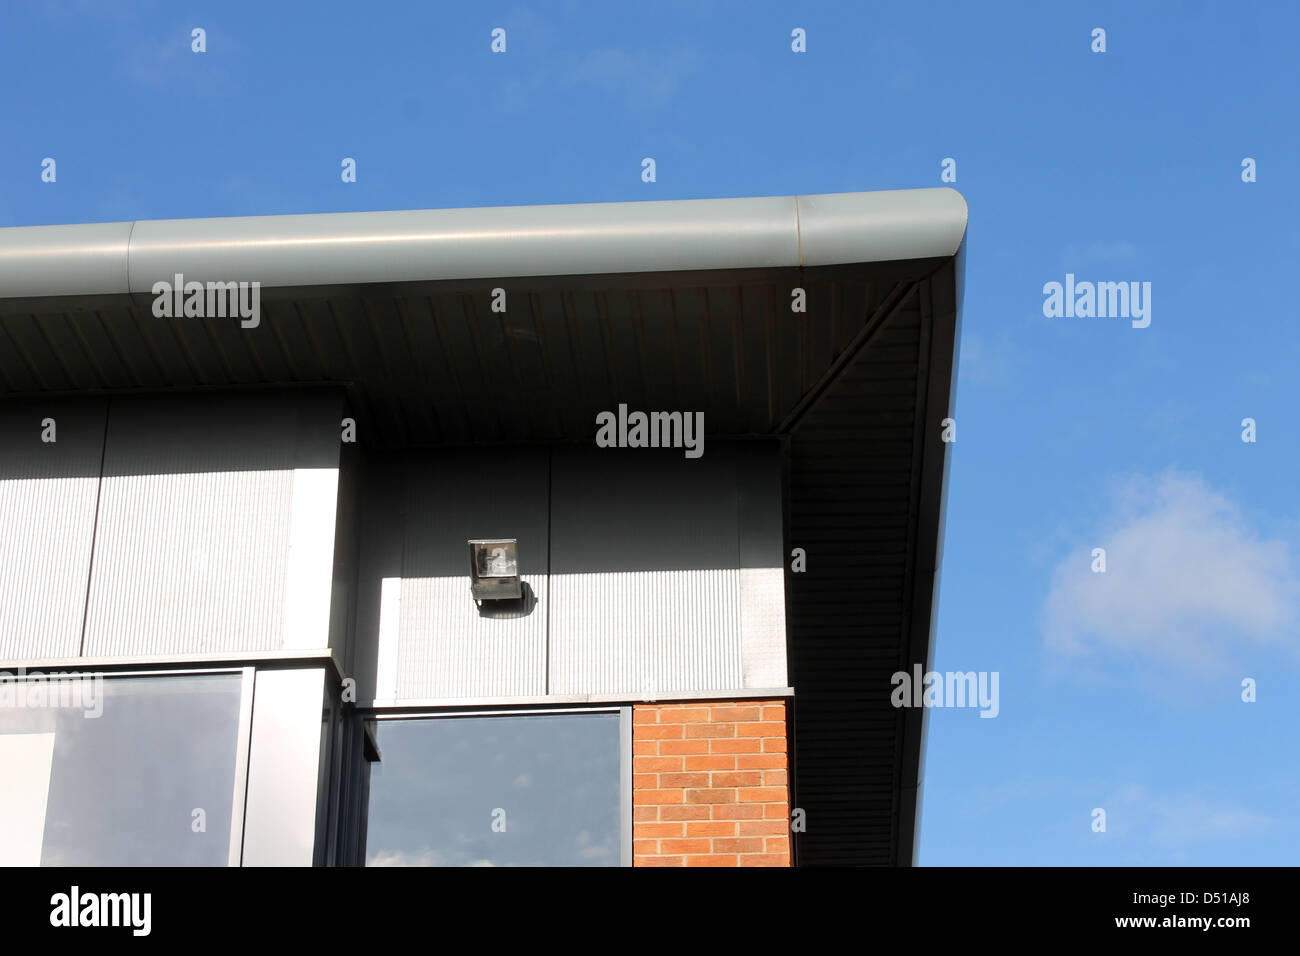 Details of modern office building showing roof and windows, blue sky background. Stock Photo